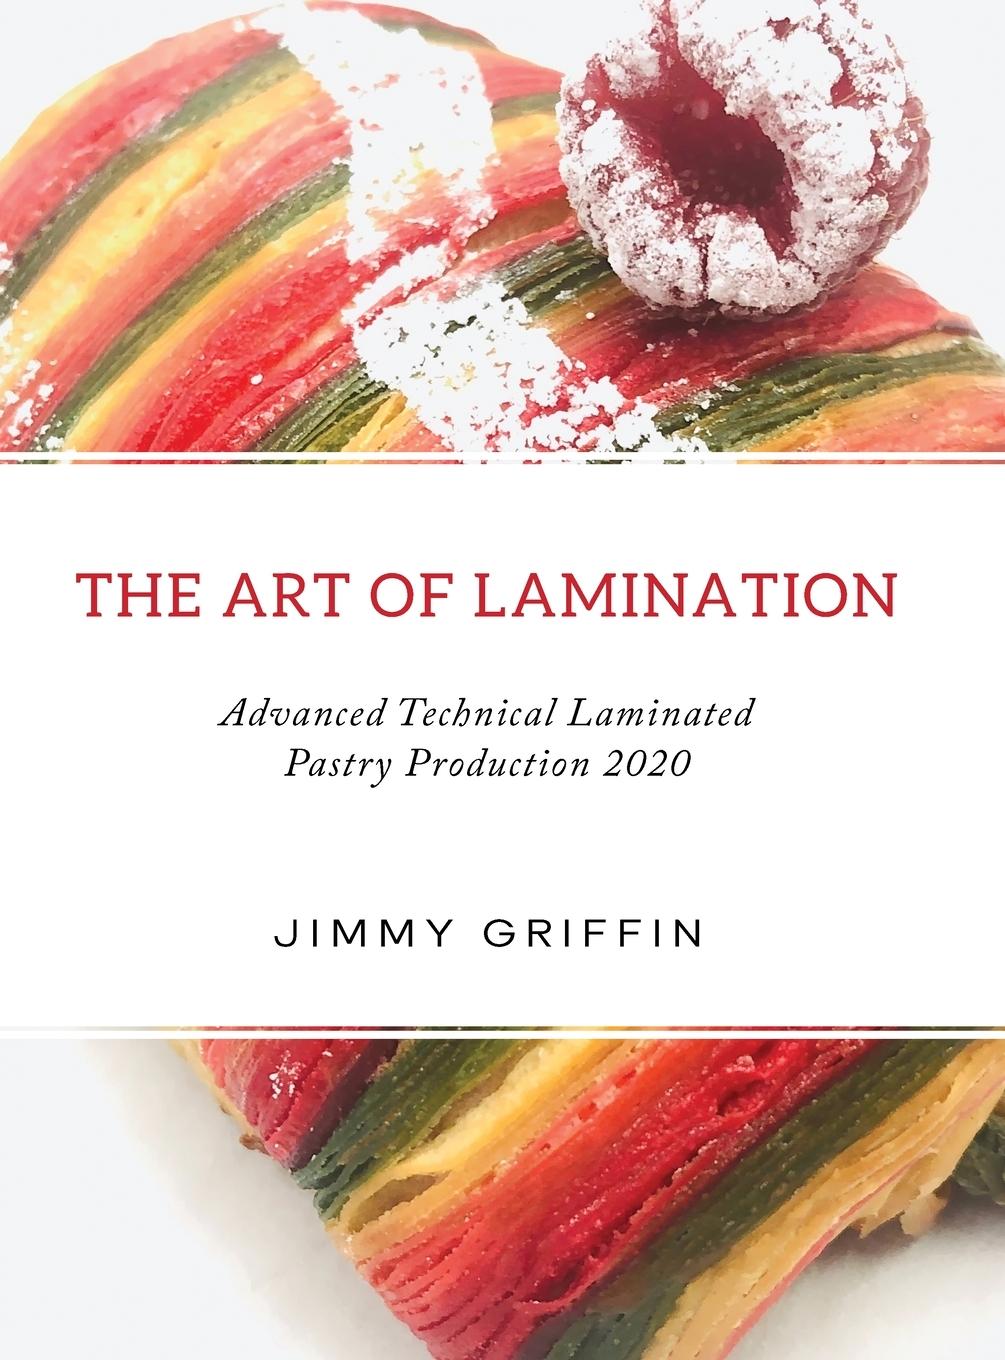 Book Art of Lamination Jimmy Griffin